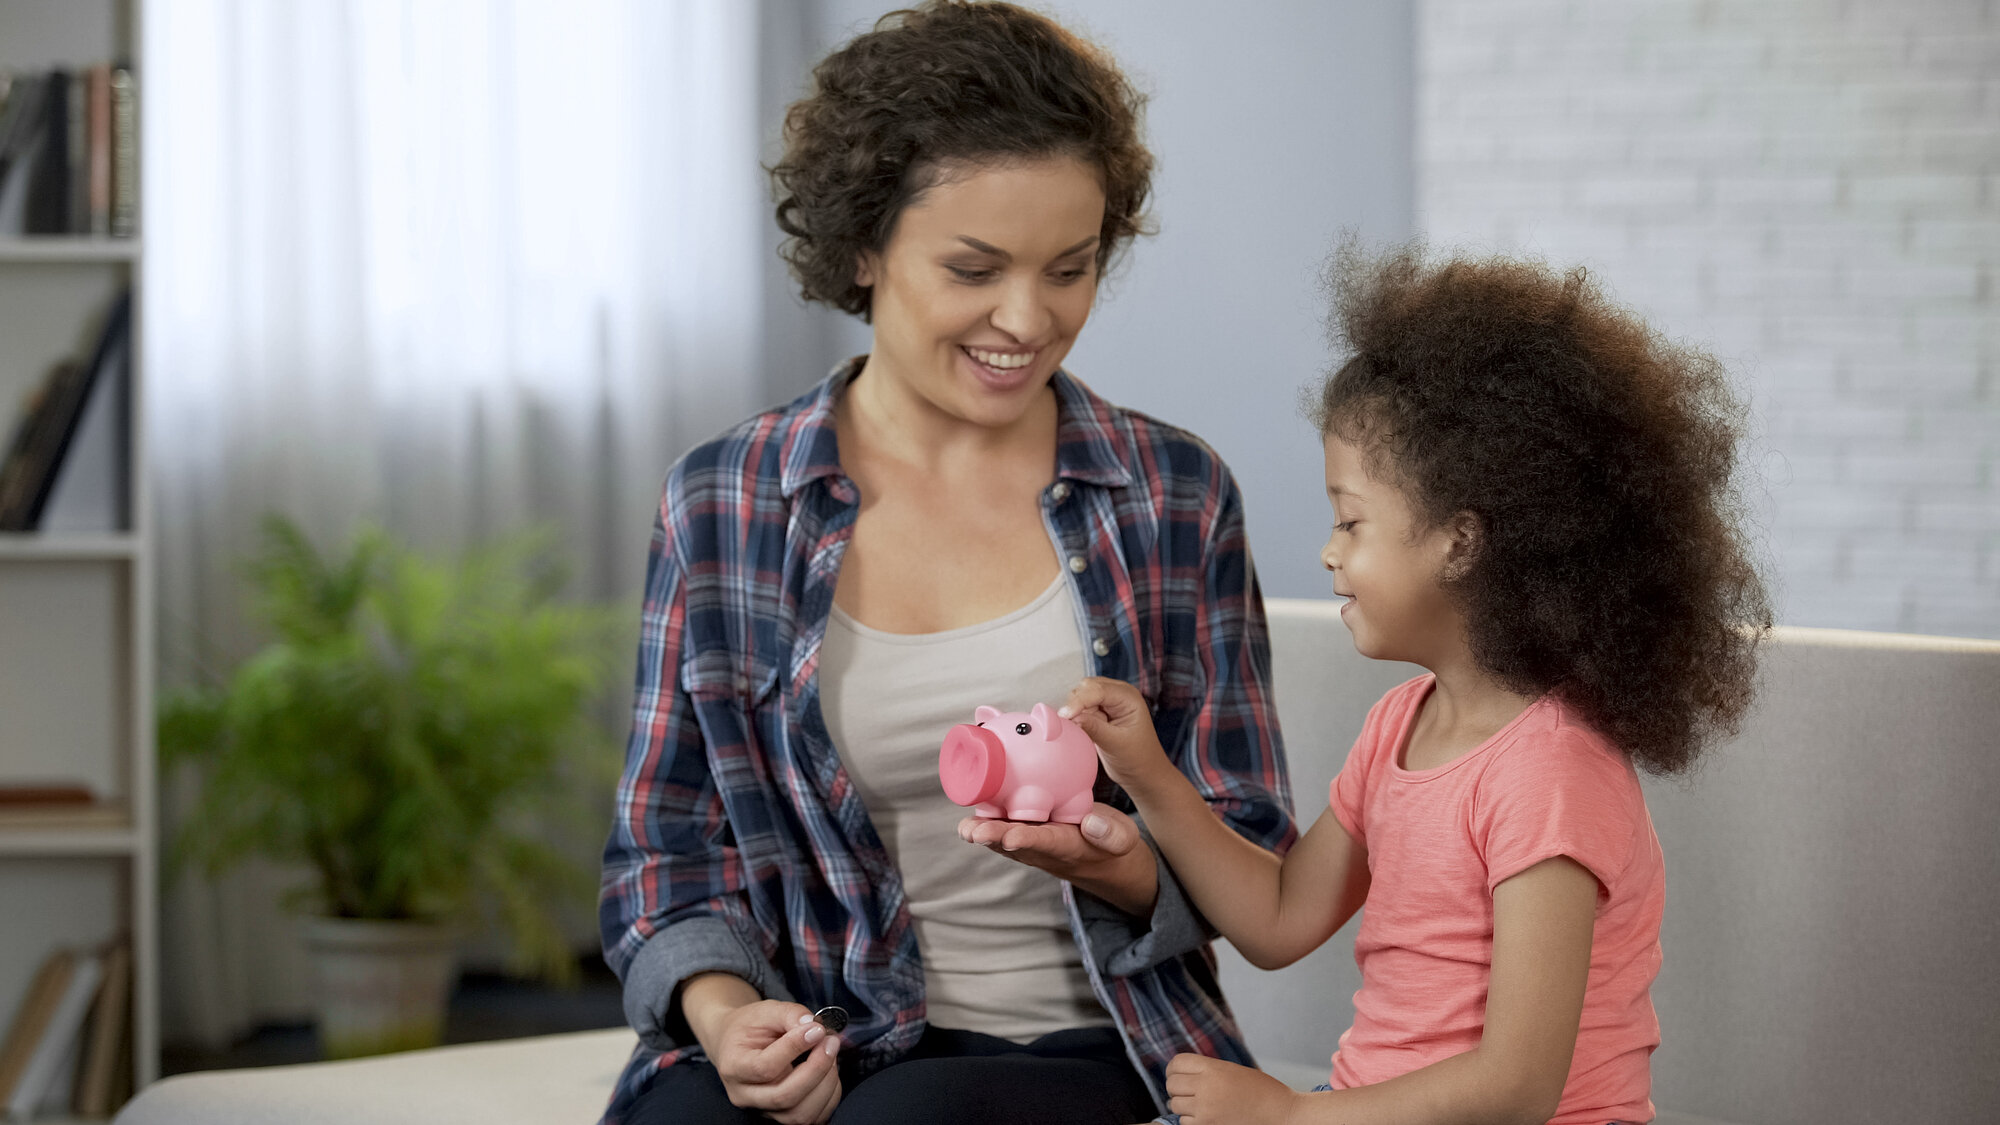 Parents have been passing down what they’ve learned about finances for generations. Now financial literacy is being taught mainstream. Let’s explore what’s changed over time.